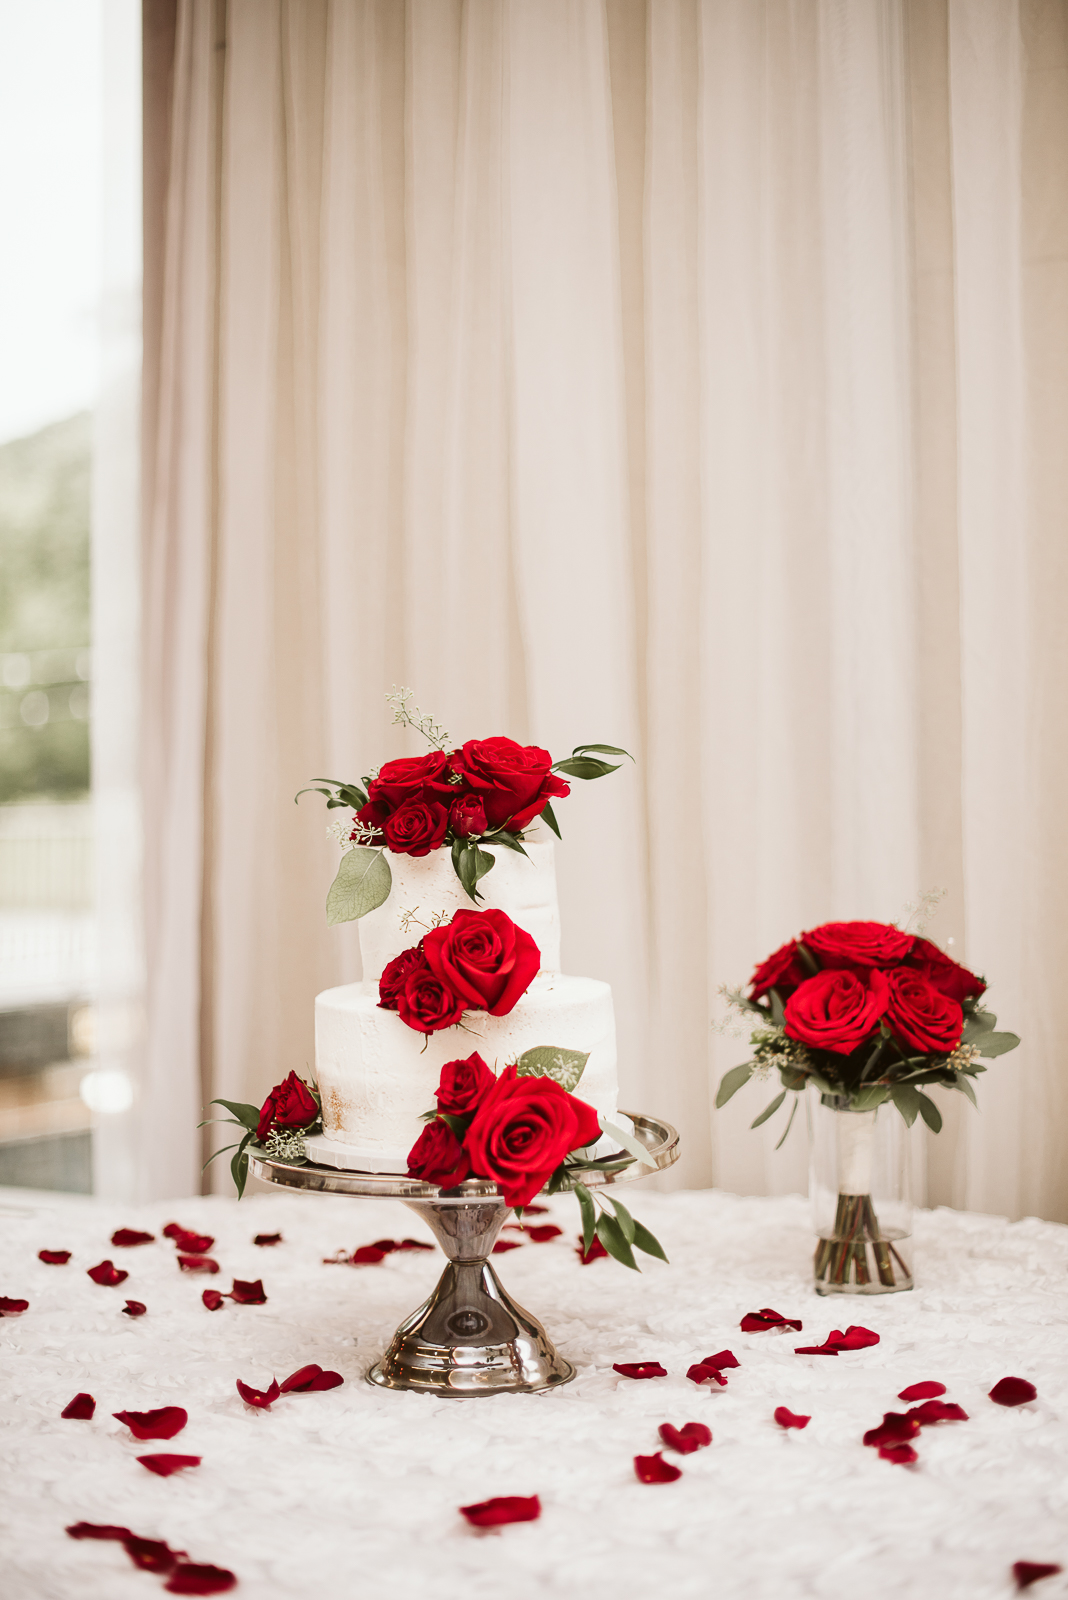 Simple, Modern Wedding Cake With Red Roses